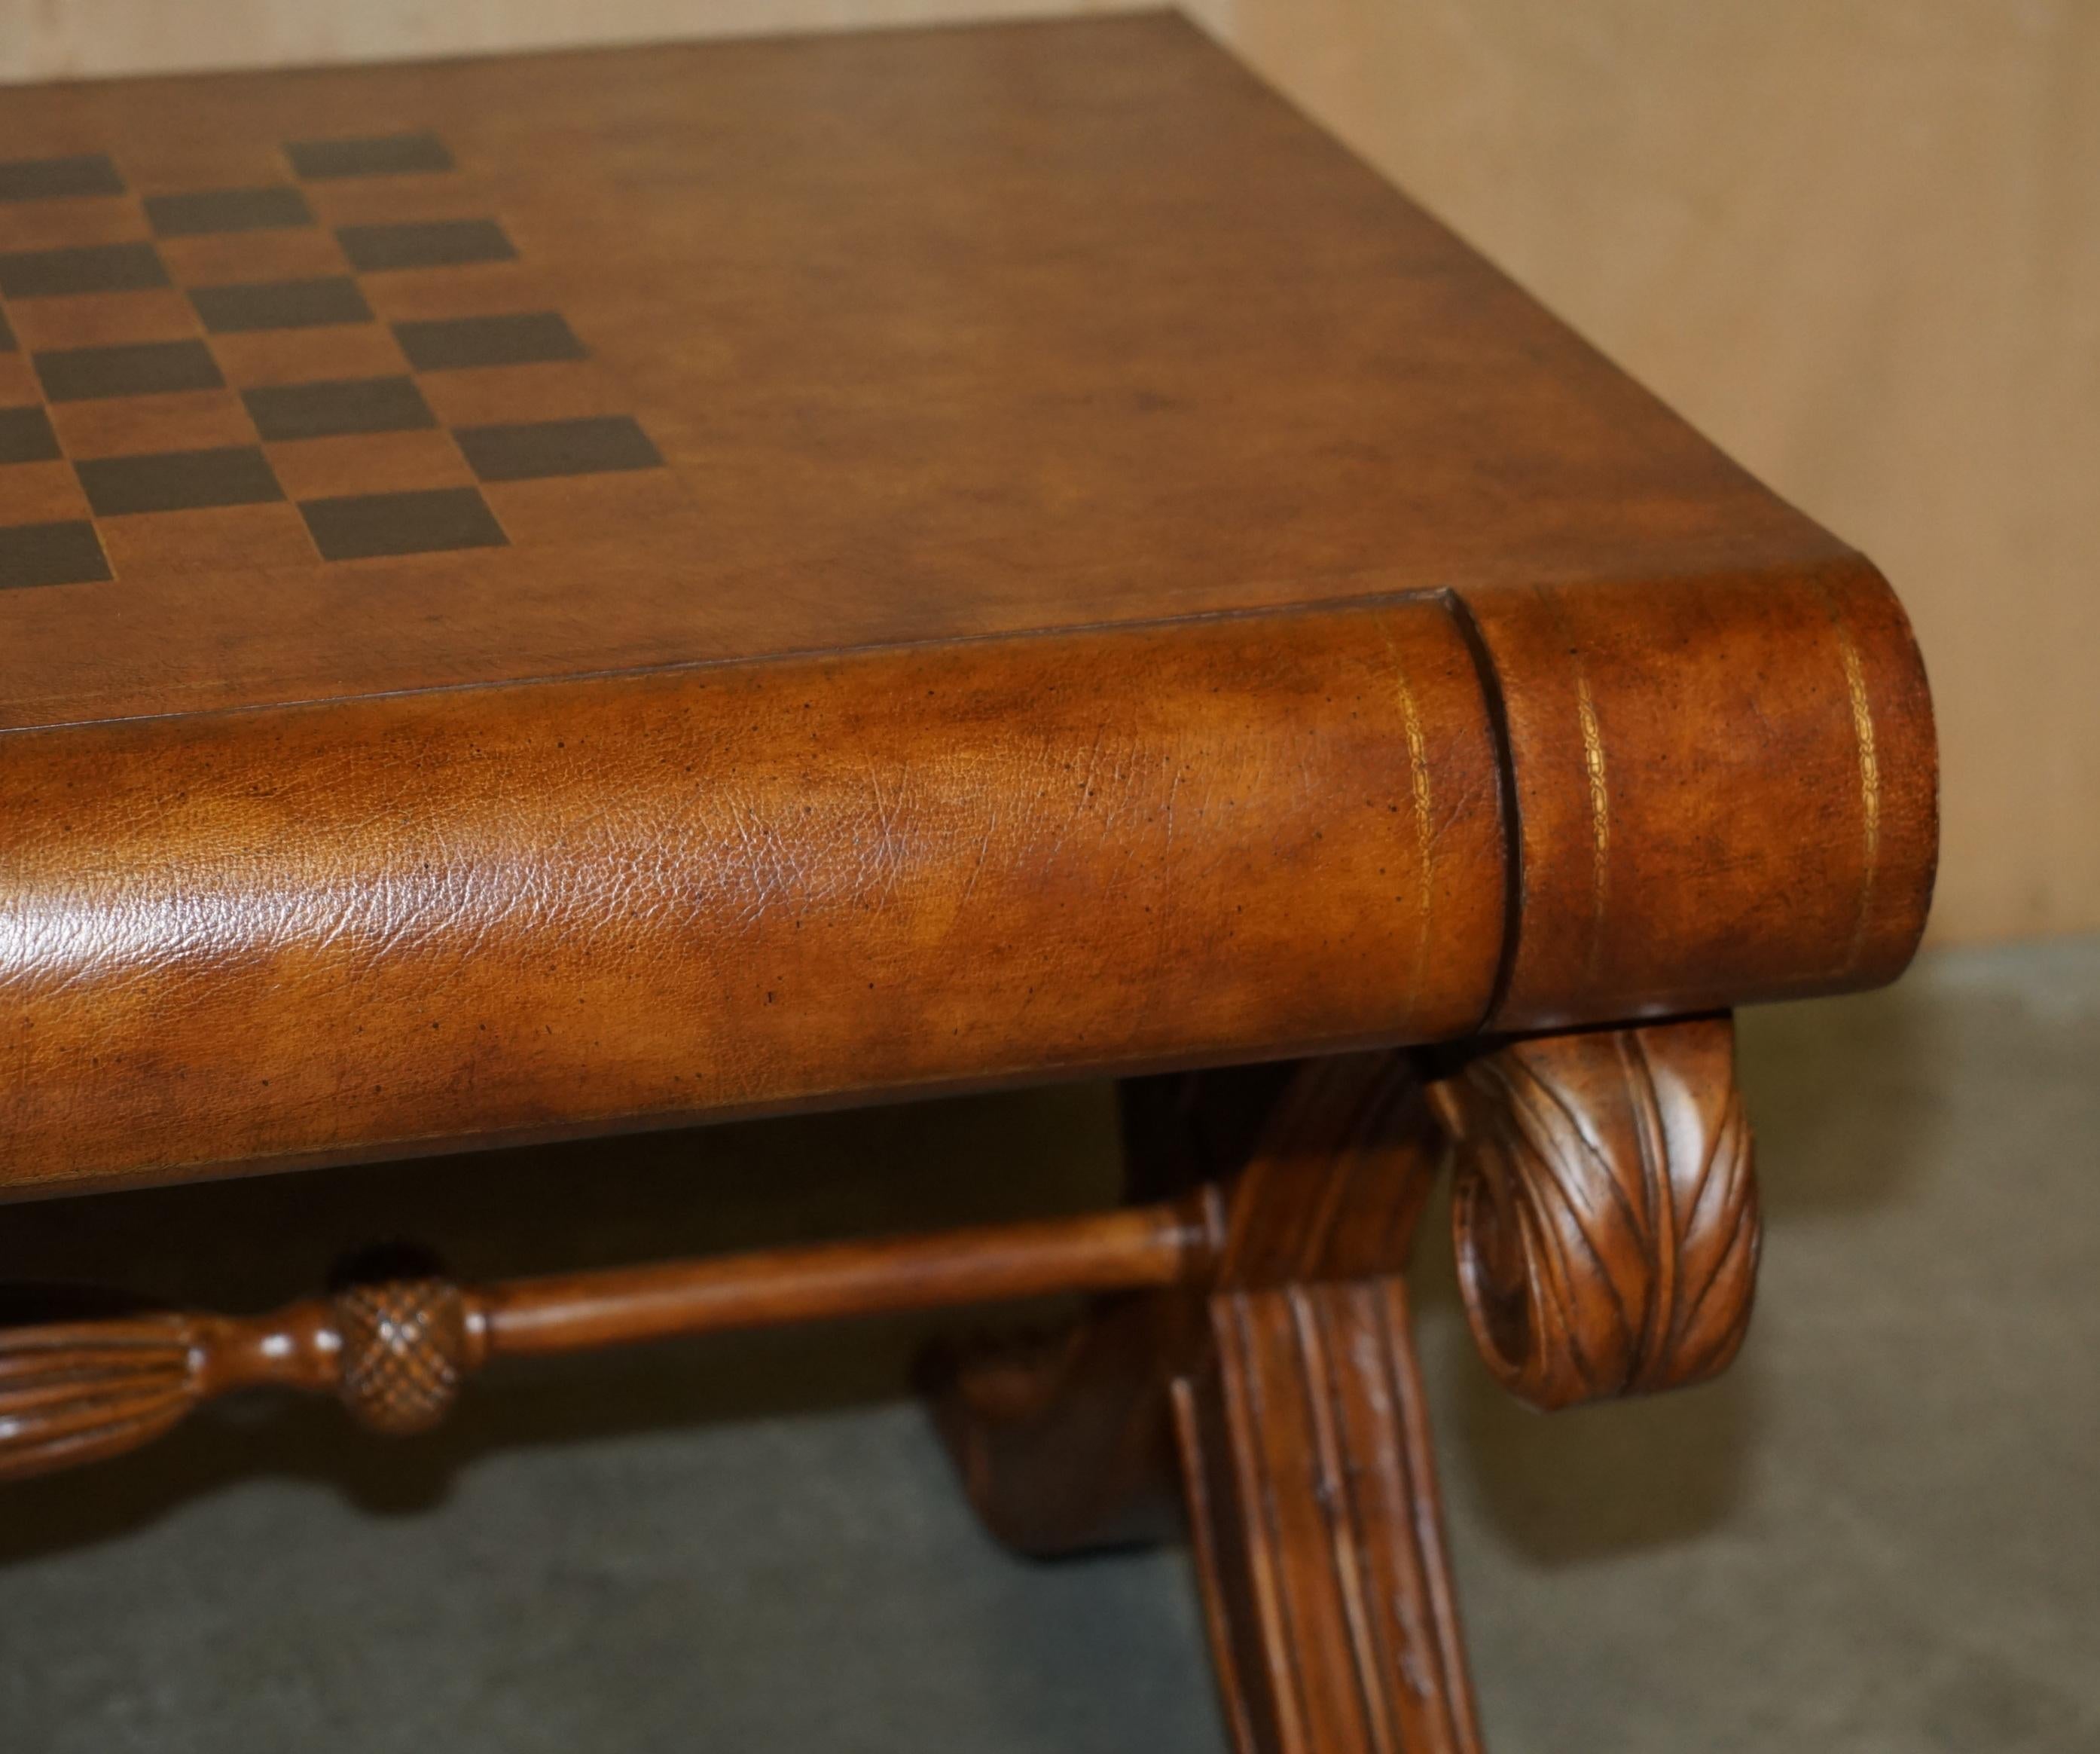 STUNNiNG HANDDYED BROWN LEATHER SCHOLARS BOOK CHESSBOARD CHESS COFFEE TABLE im Angebot 2